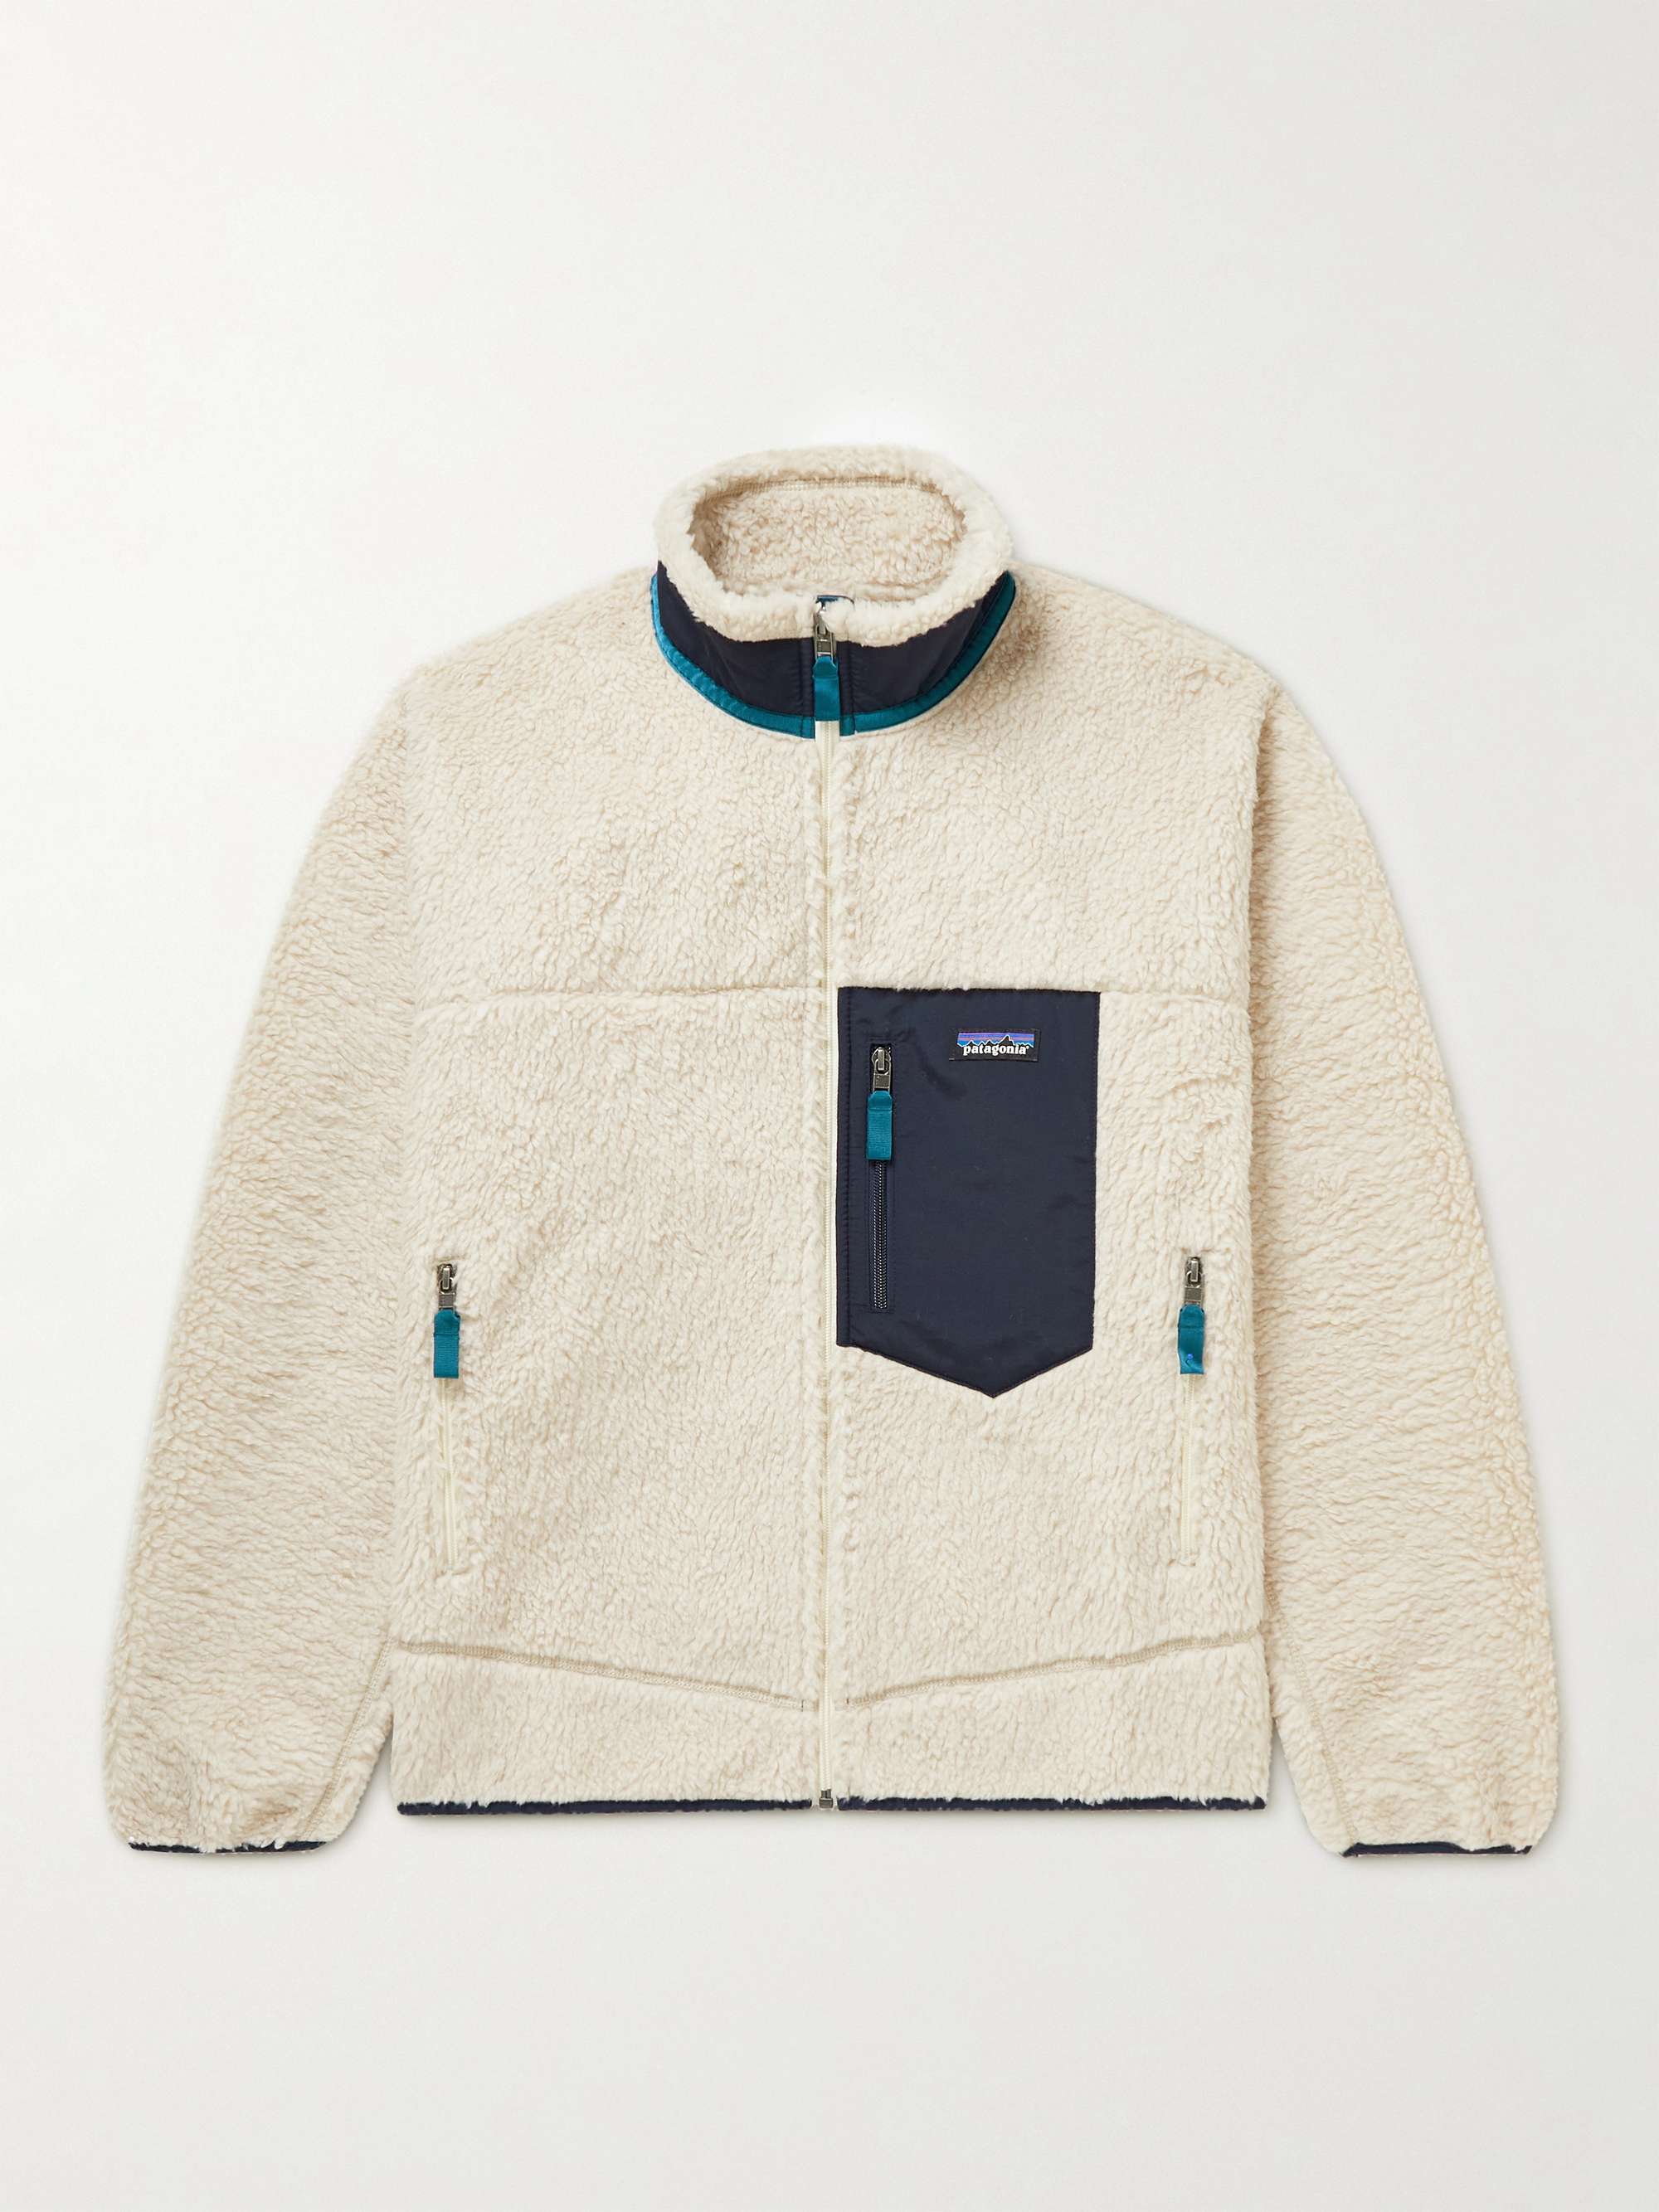 PATAGONIA Logo-Appliquéd Shell-Trimmed Recycled Fleece Zip-Up Jacket